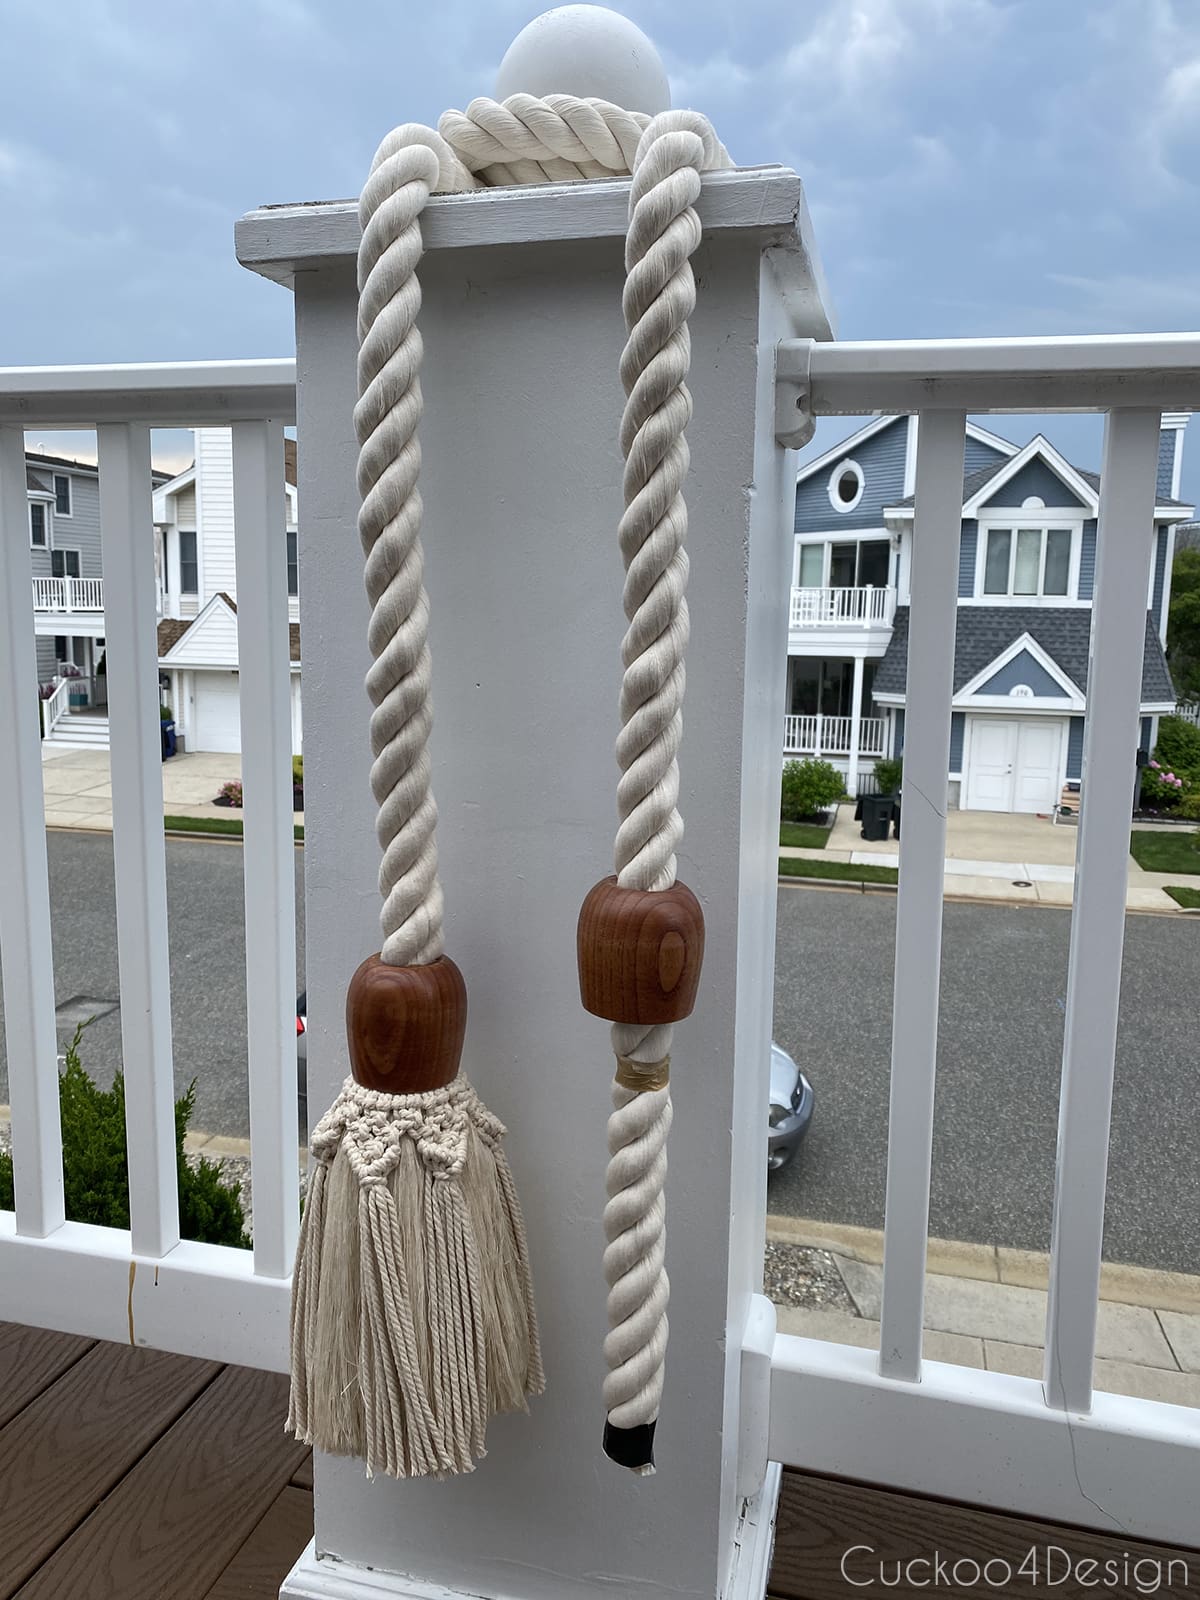 cotton rope hanging on a post to work on tassels